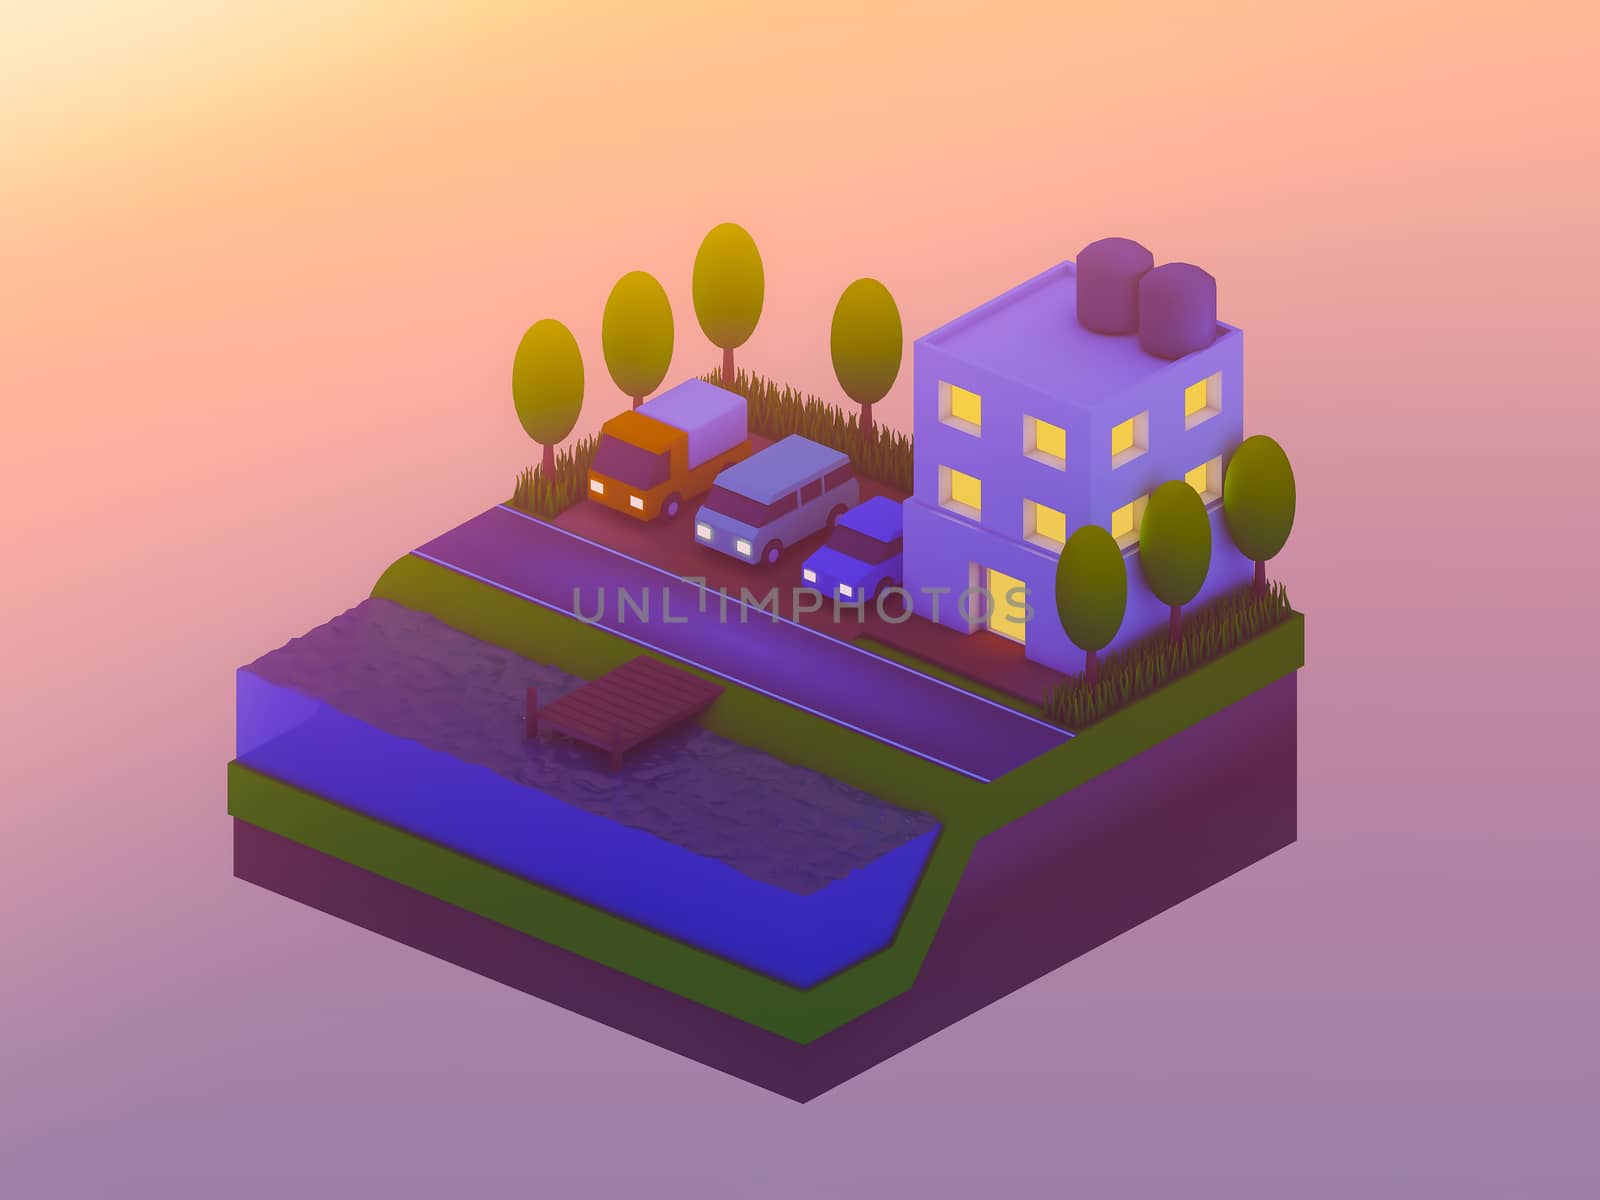  isometric city buildings, landscape, Road and river, isometric city background